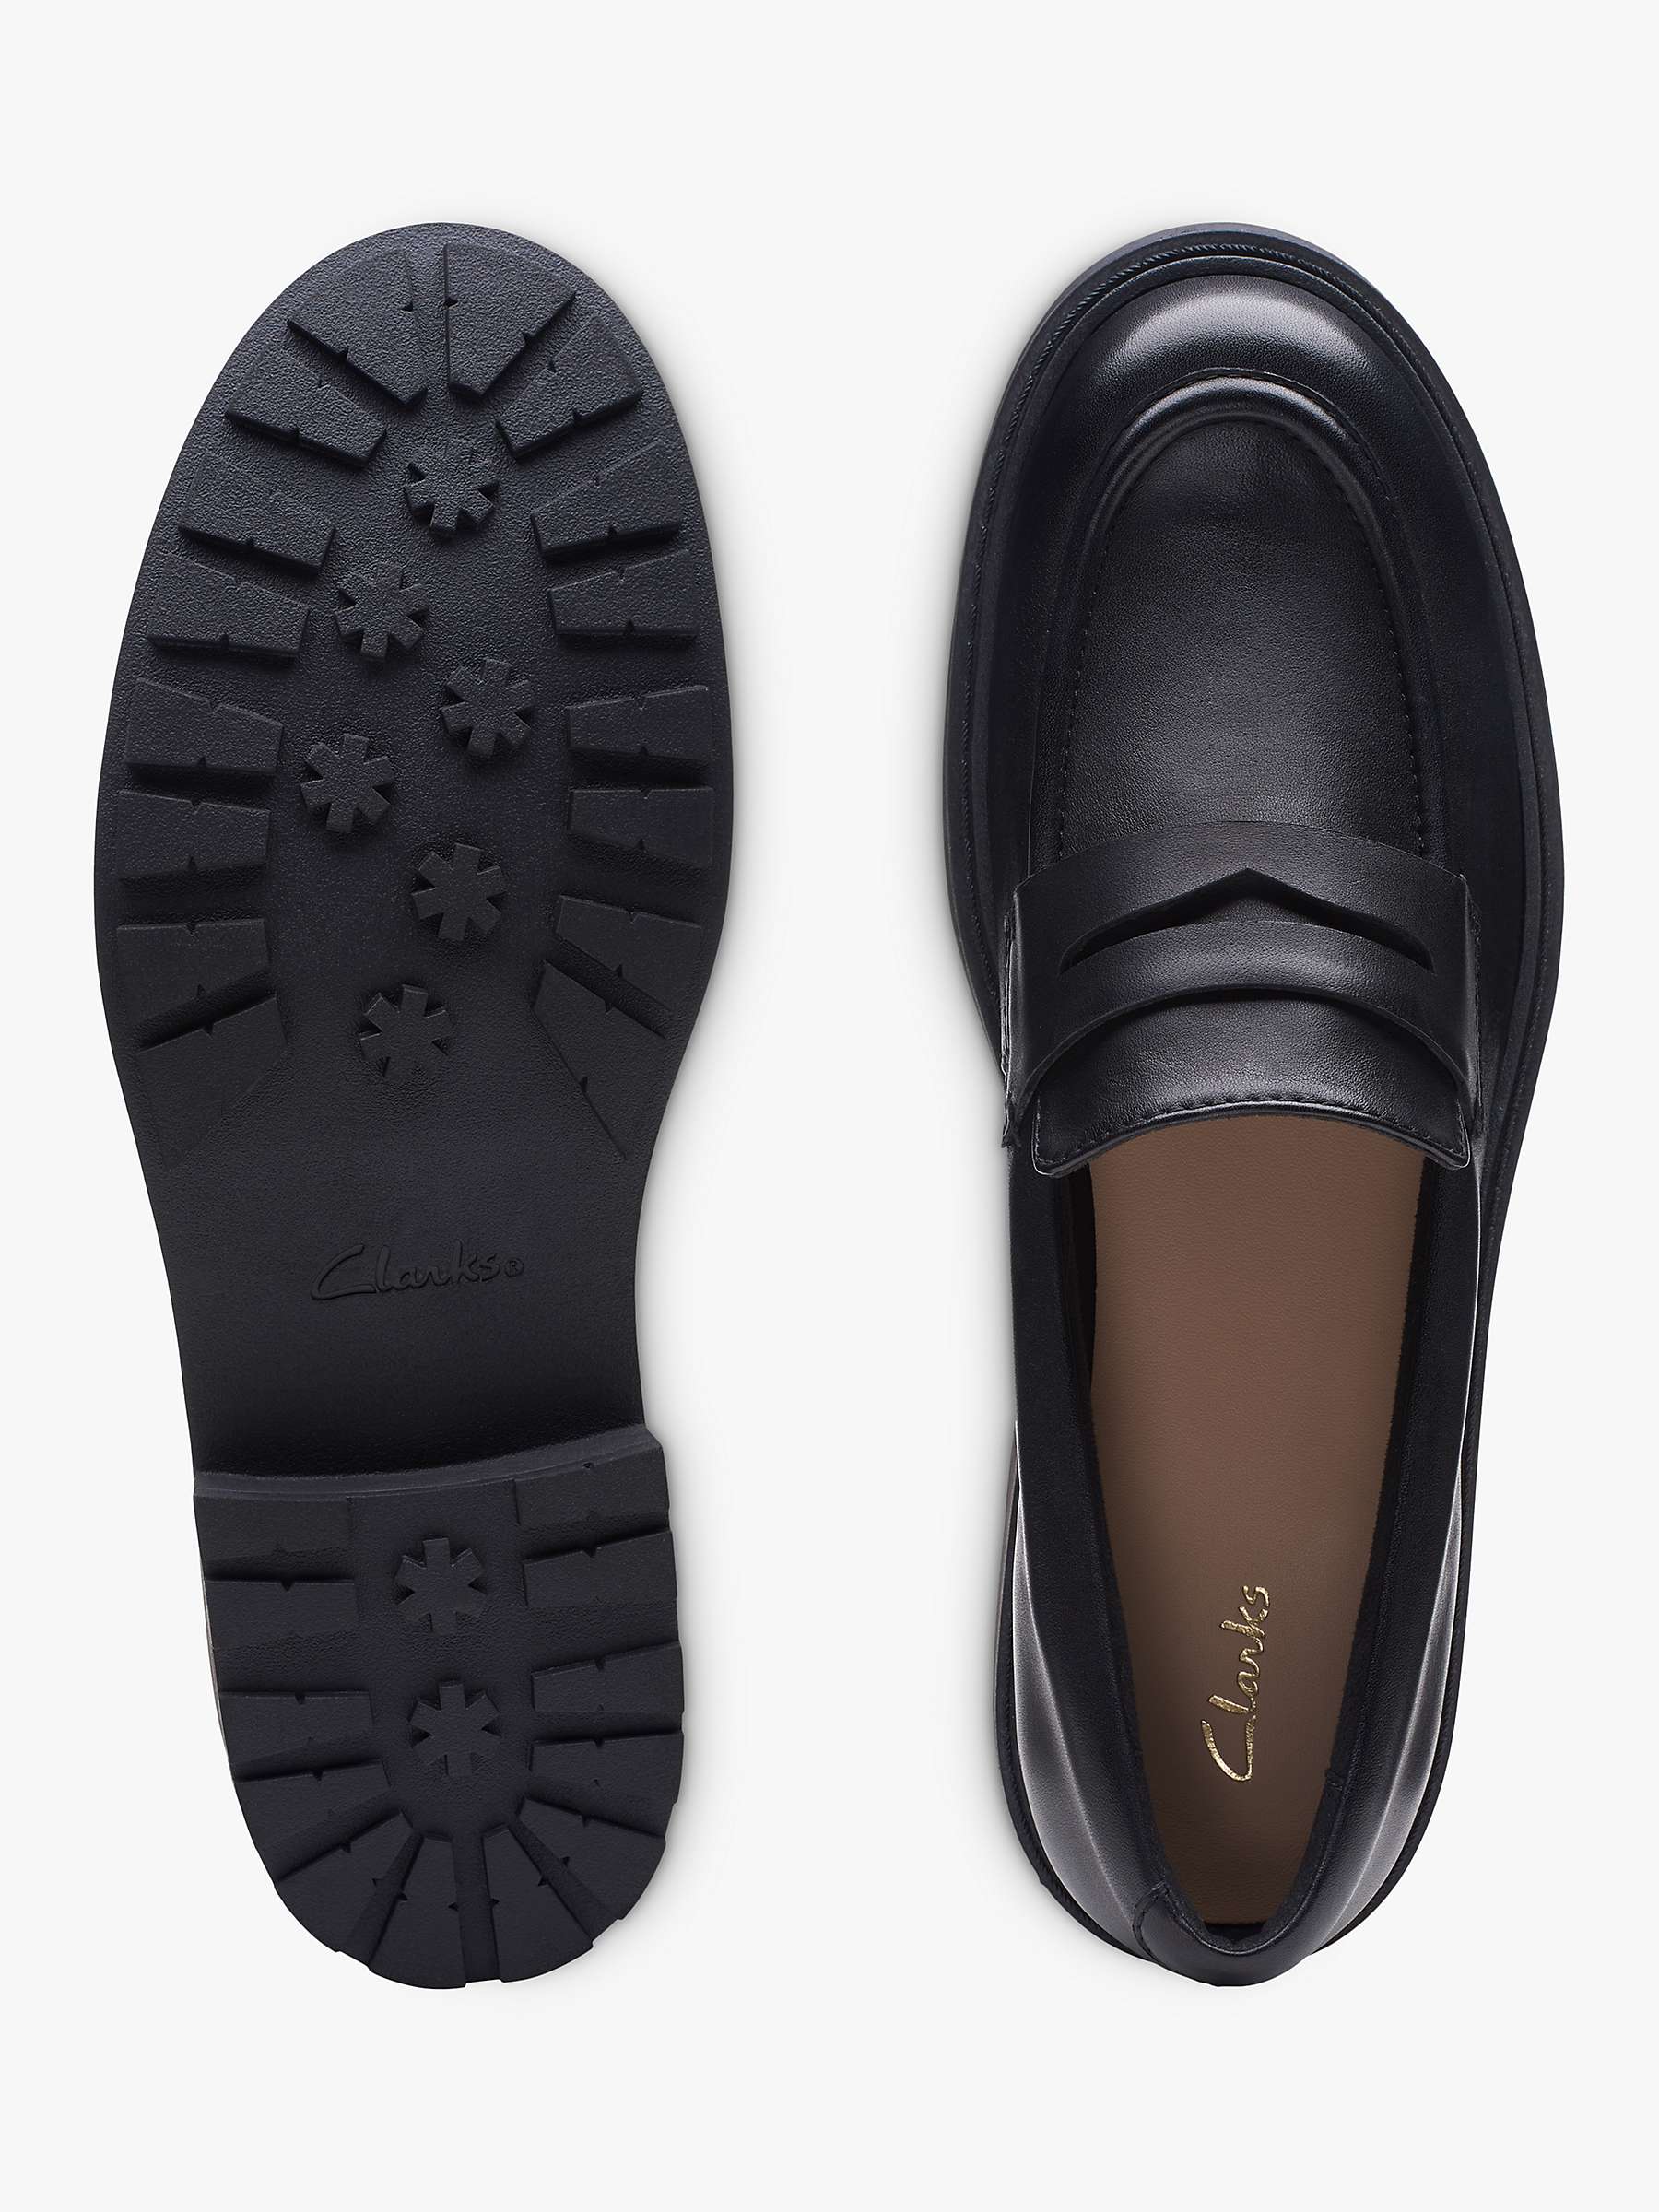 Buy Clarks Orinoco 2 Penny Leather Loafers, Black Online at johnlewis.com